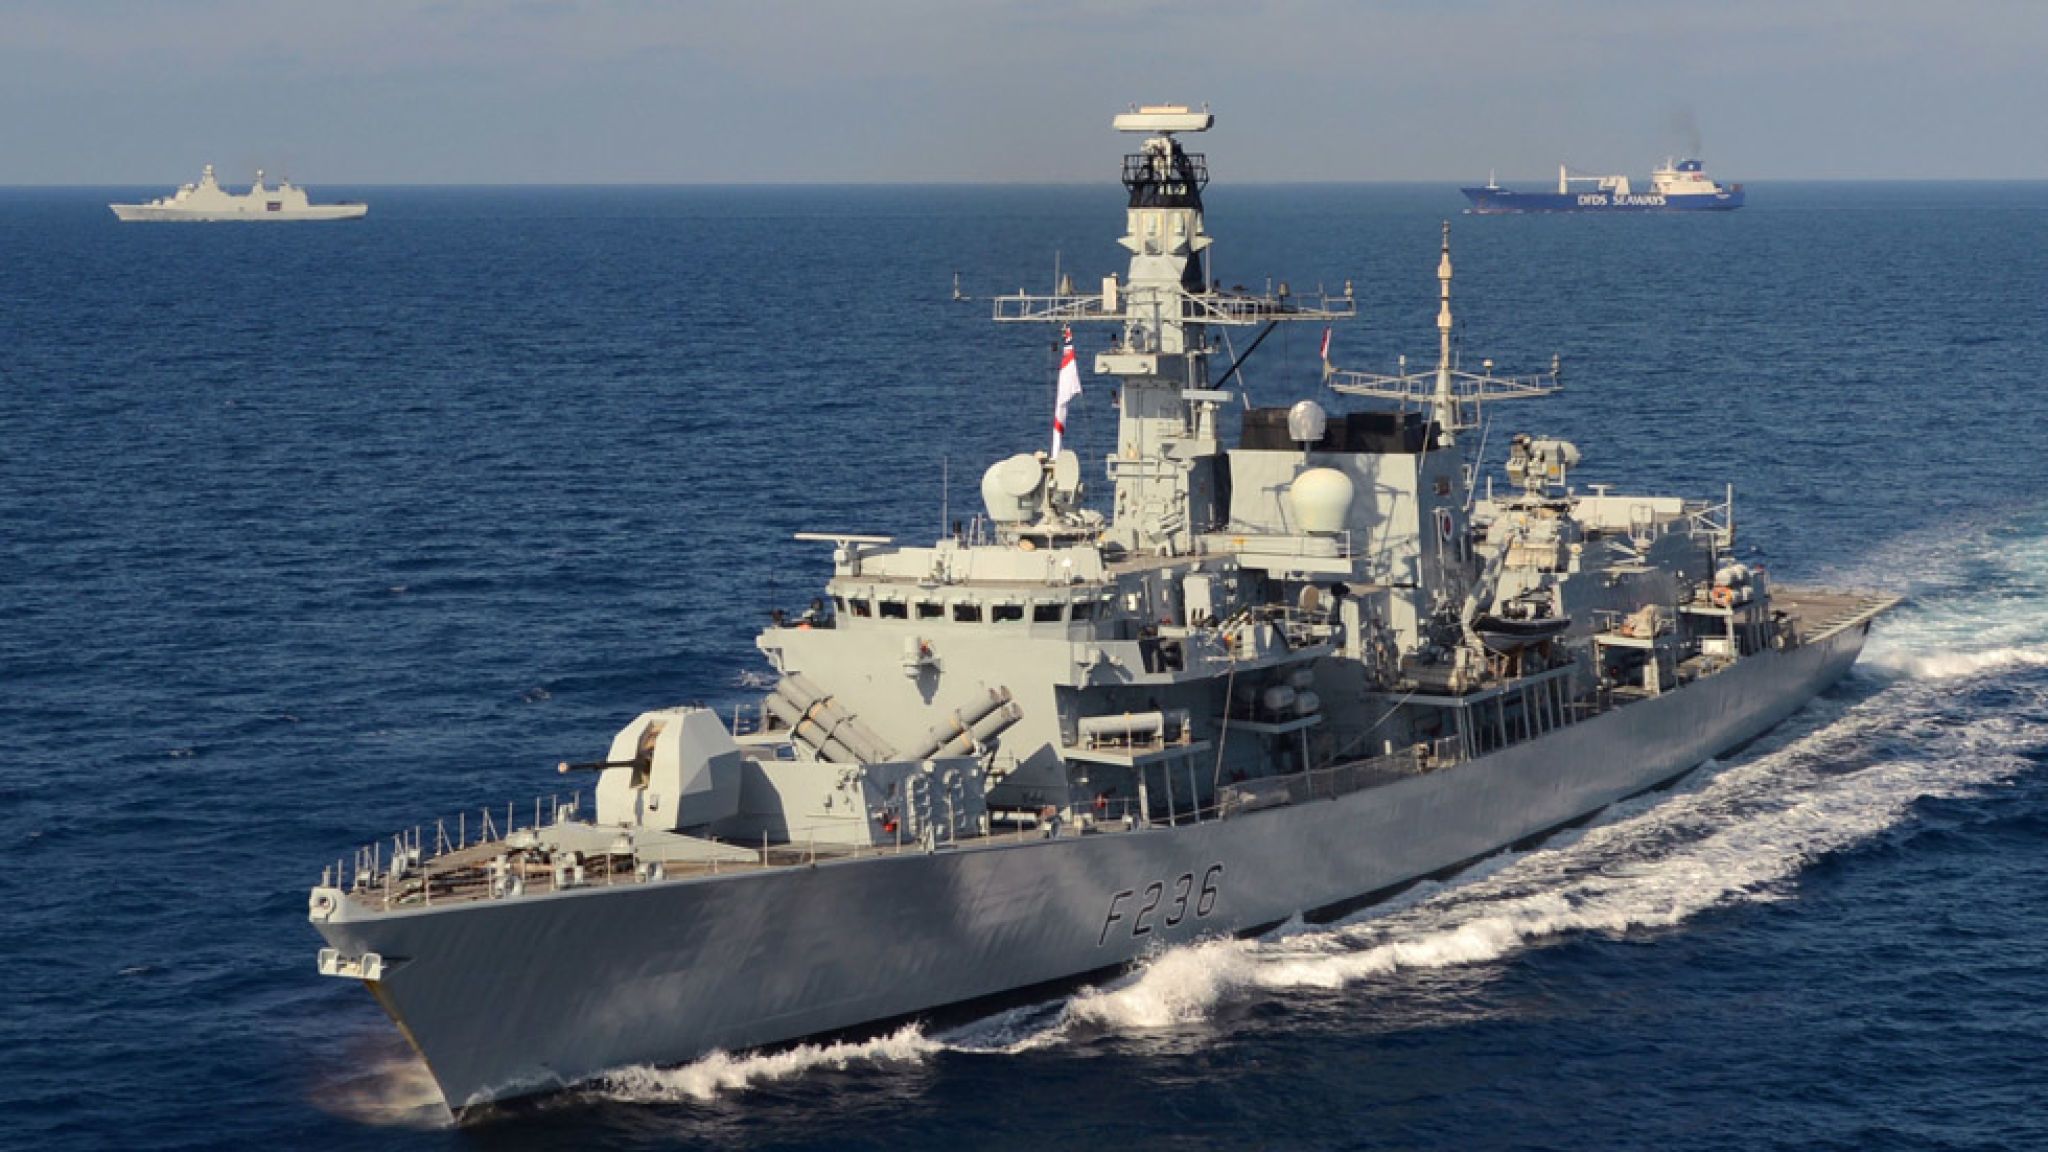 Hms Montrose Provided Added Protection To The Tanker - Royal Navy Hms Montrose - HD Wallpaper 